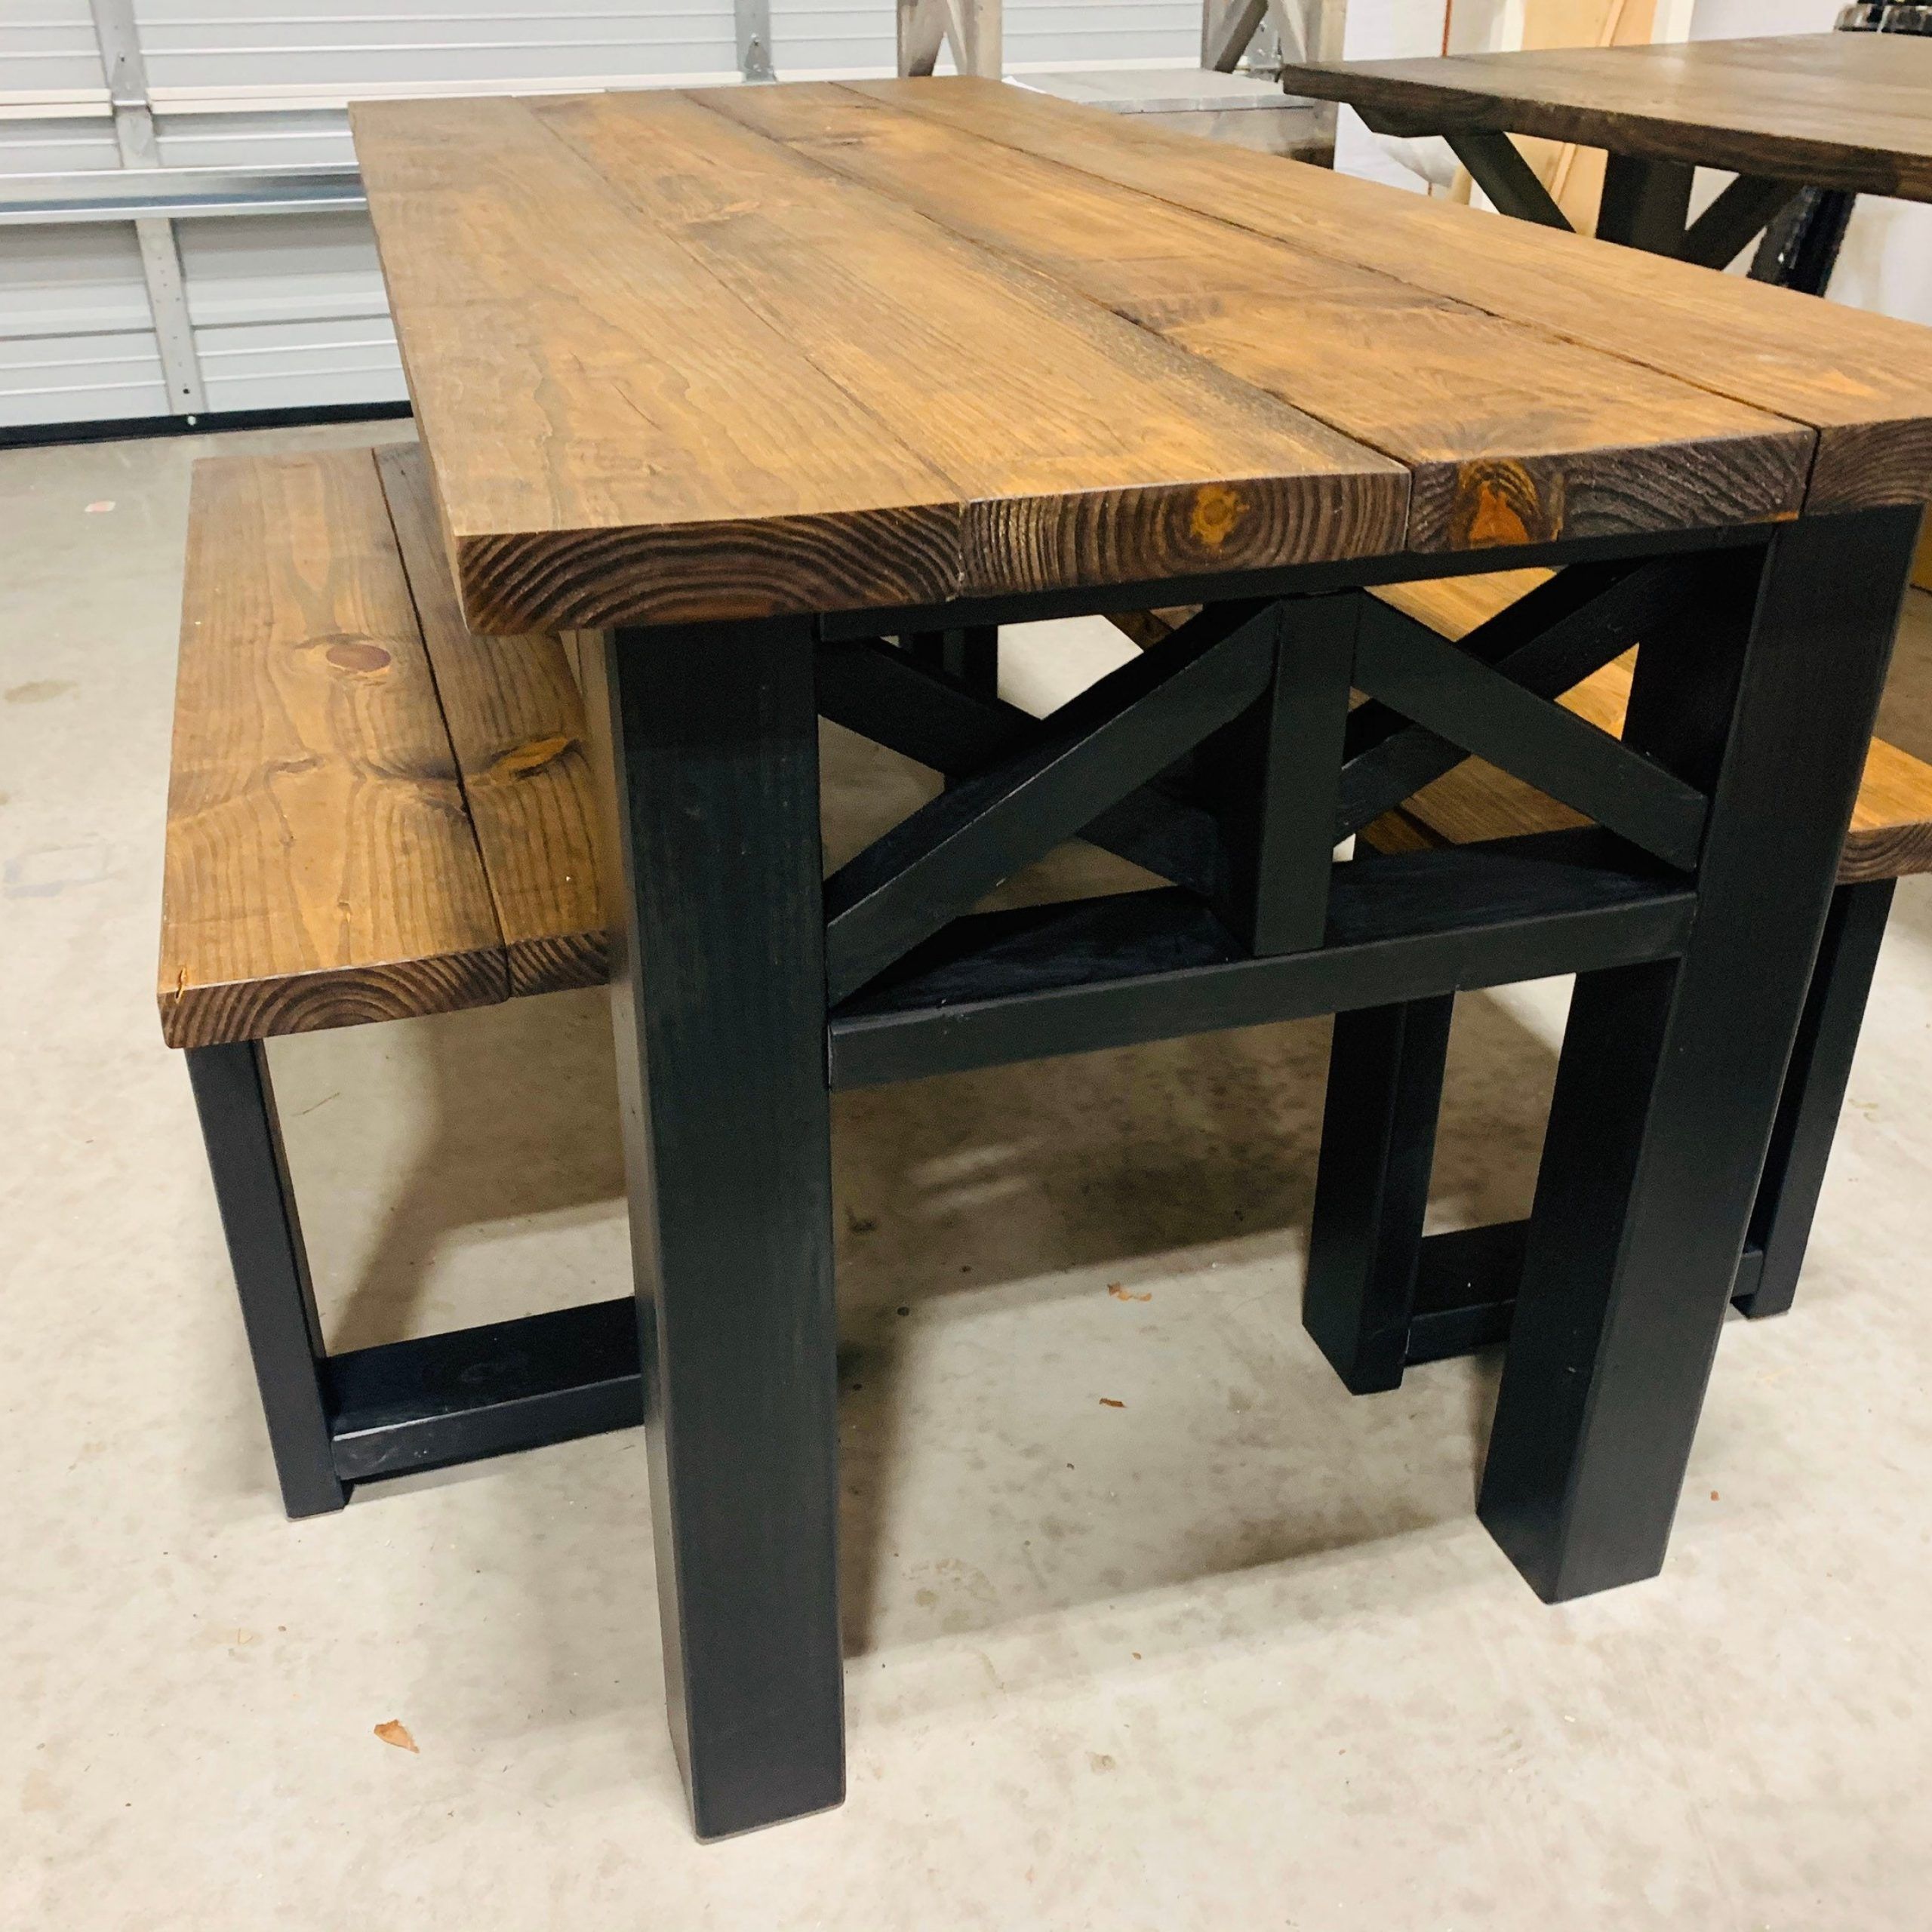 Rustic Wooden Farmhouse Table Set With Provincial Brown Top And True Within Wood And Dark Bronze Criss Cross Desks (View 12 of 15)